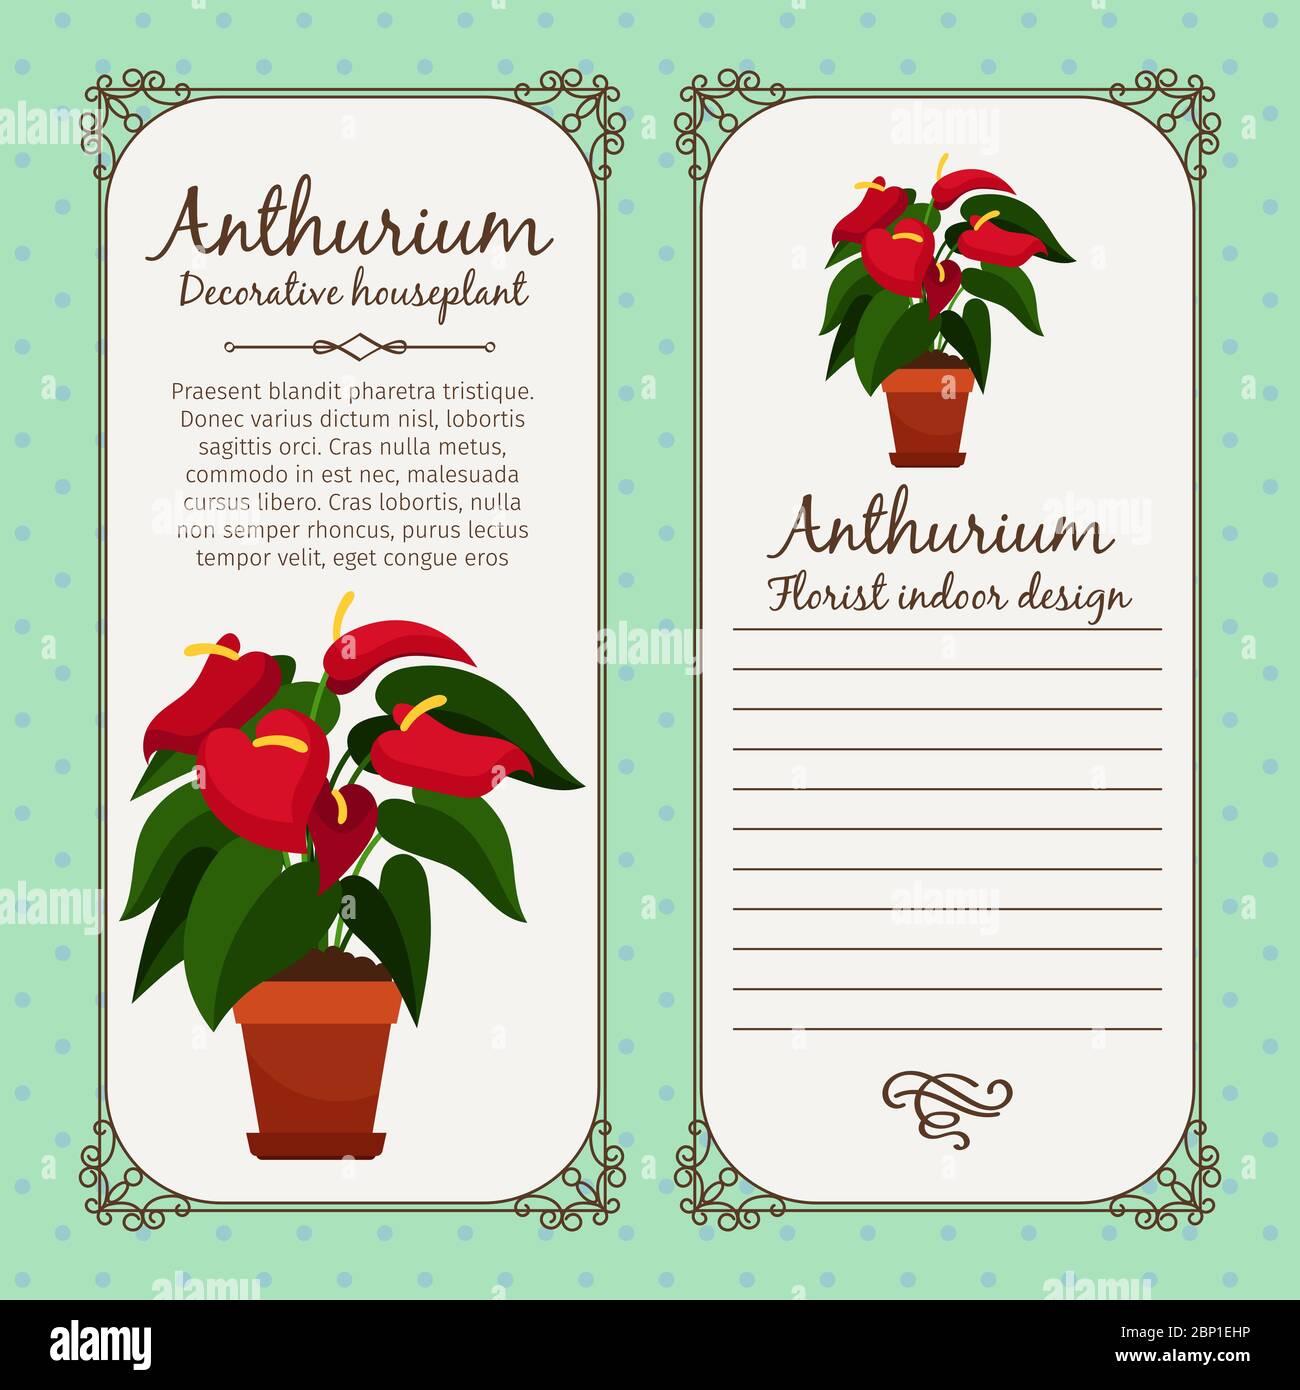 Vintage label template with decorative anthurium plant in pot, vector illustration Stock Vector